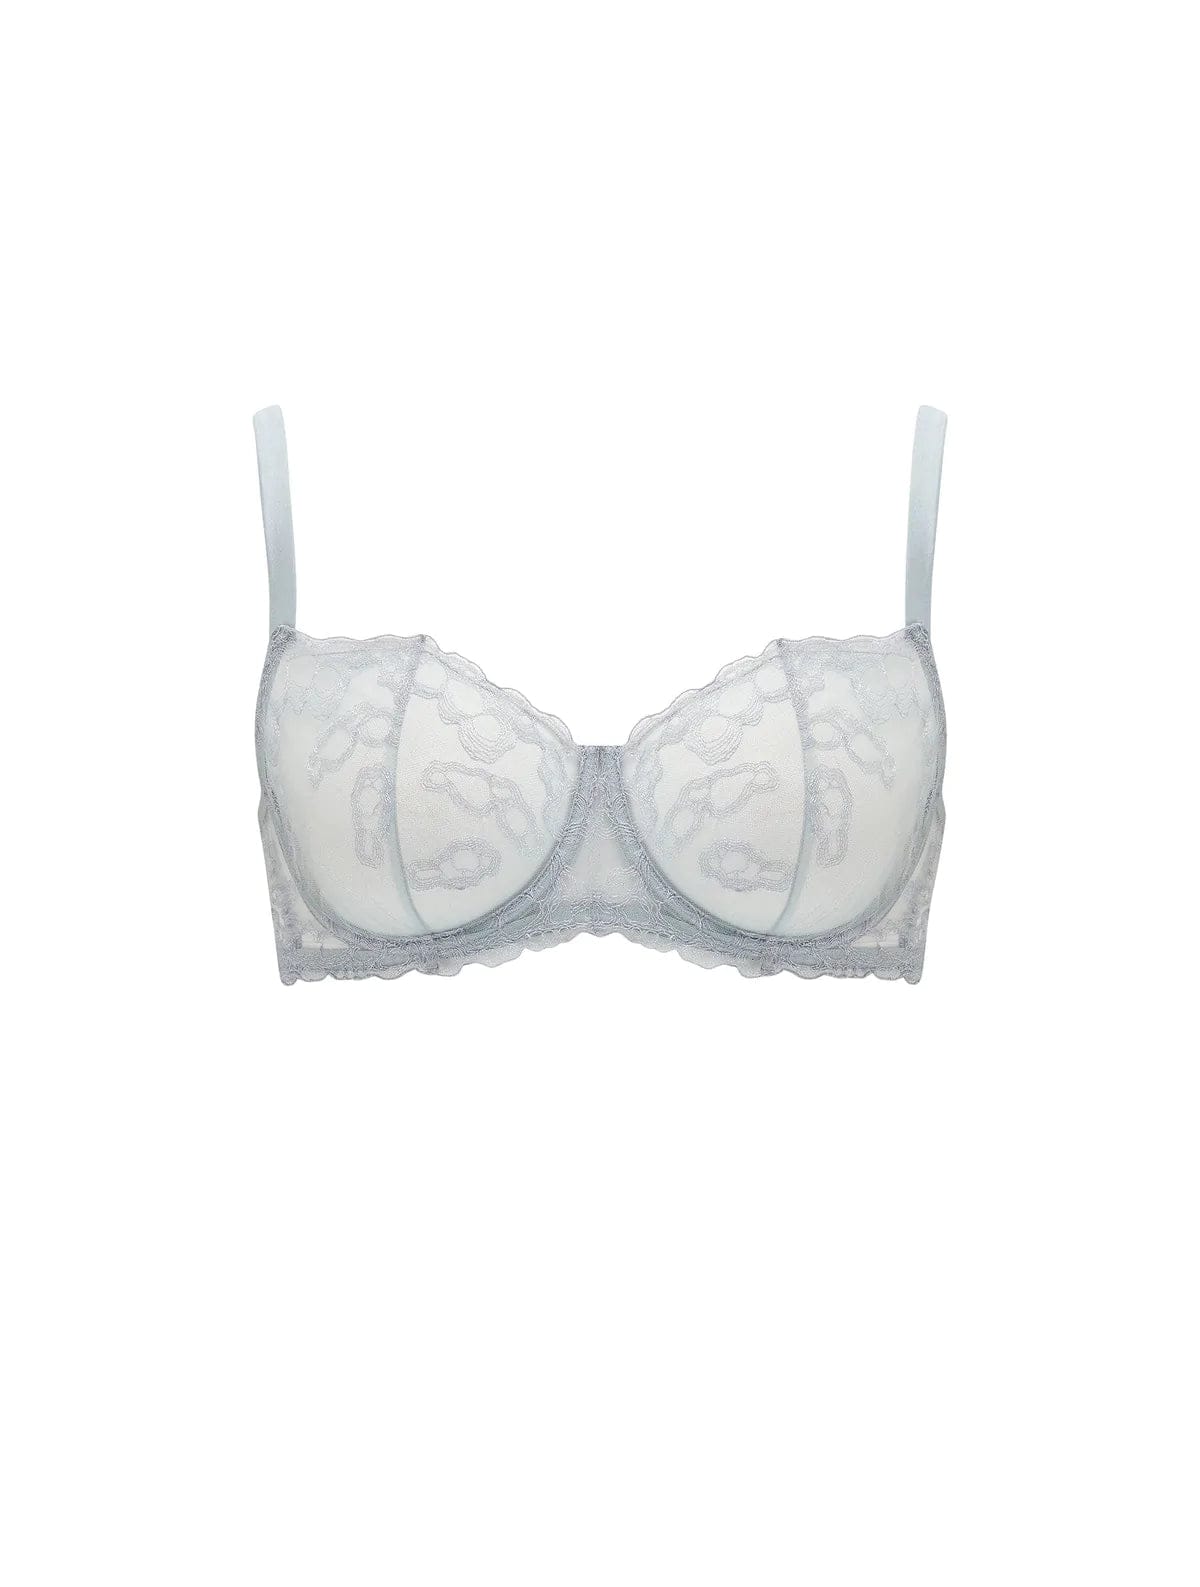 Luxurious full cup bra, tulle, embroidery, intricate pattern, C to